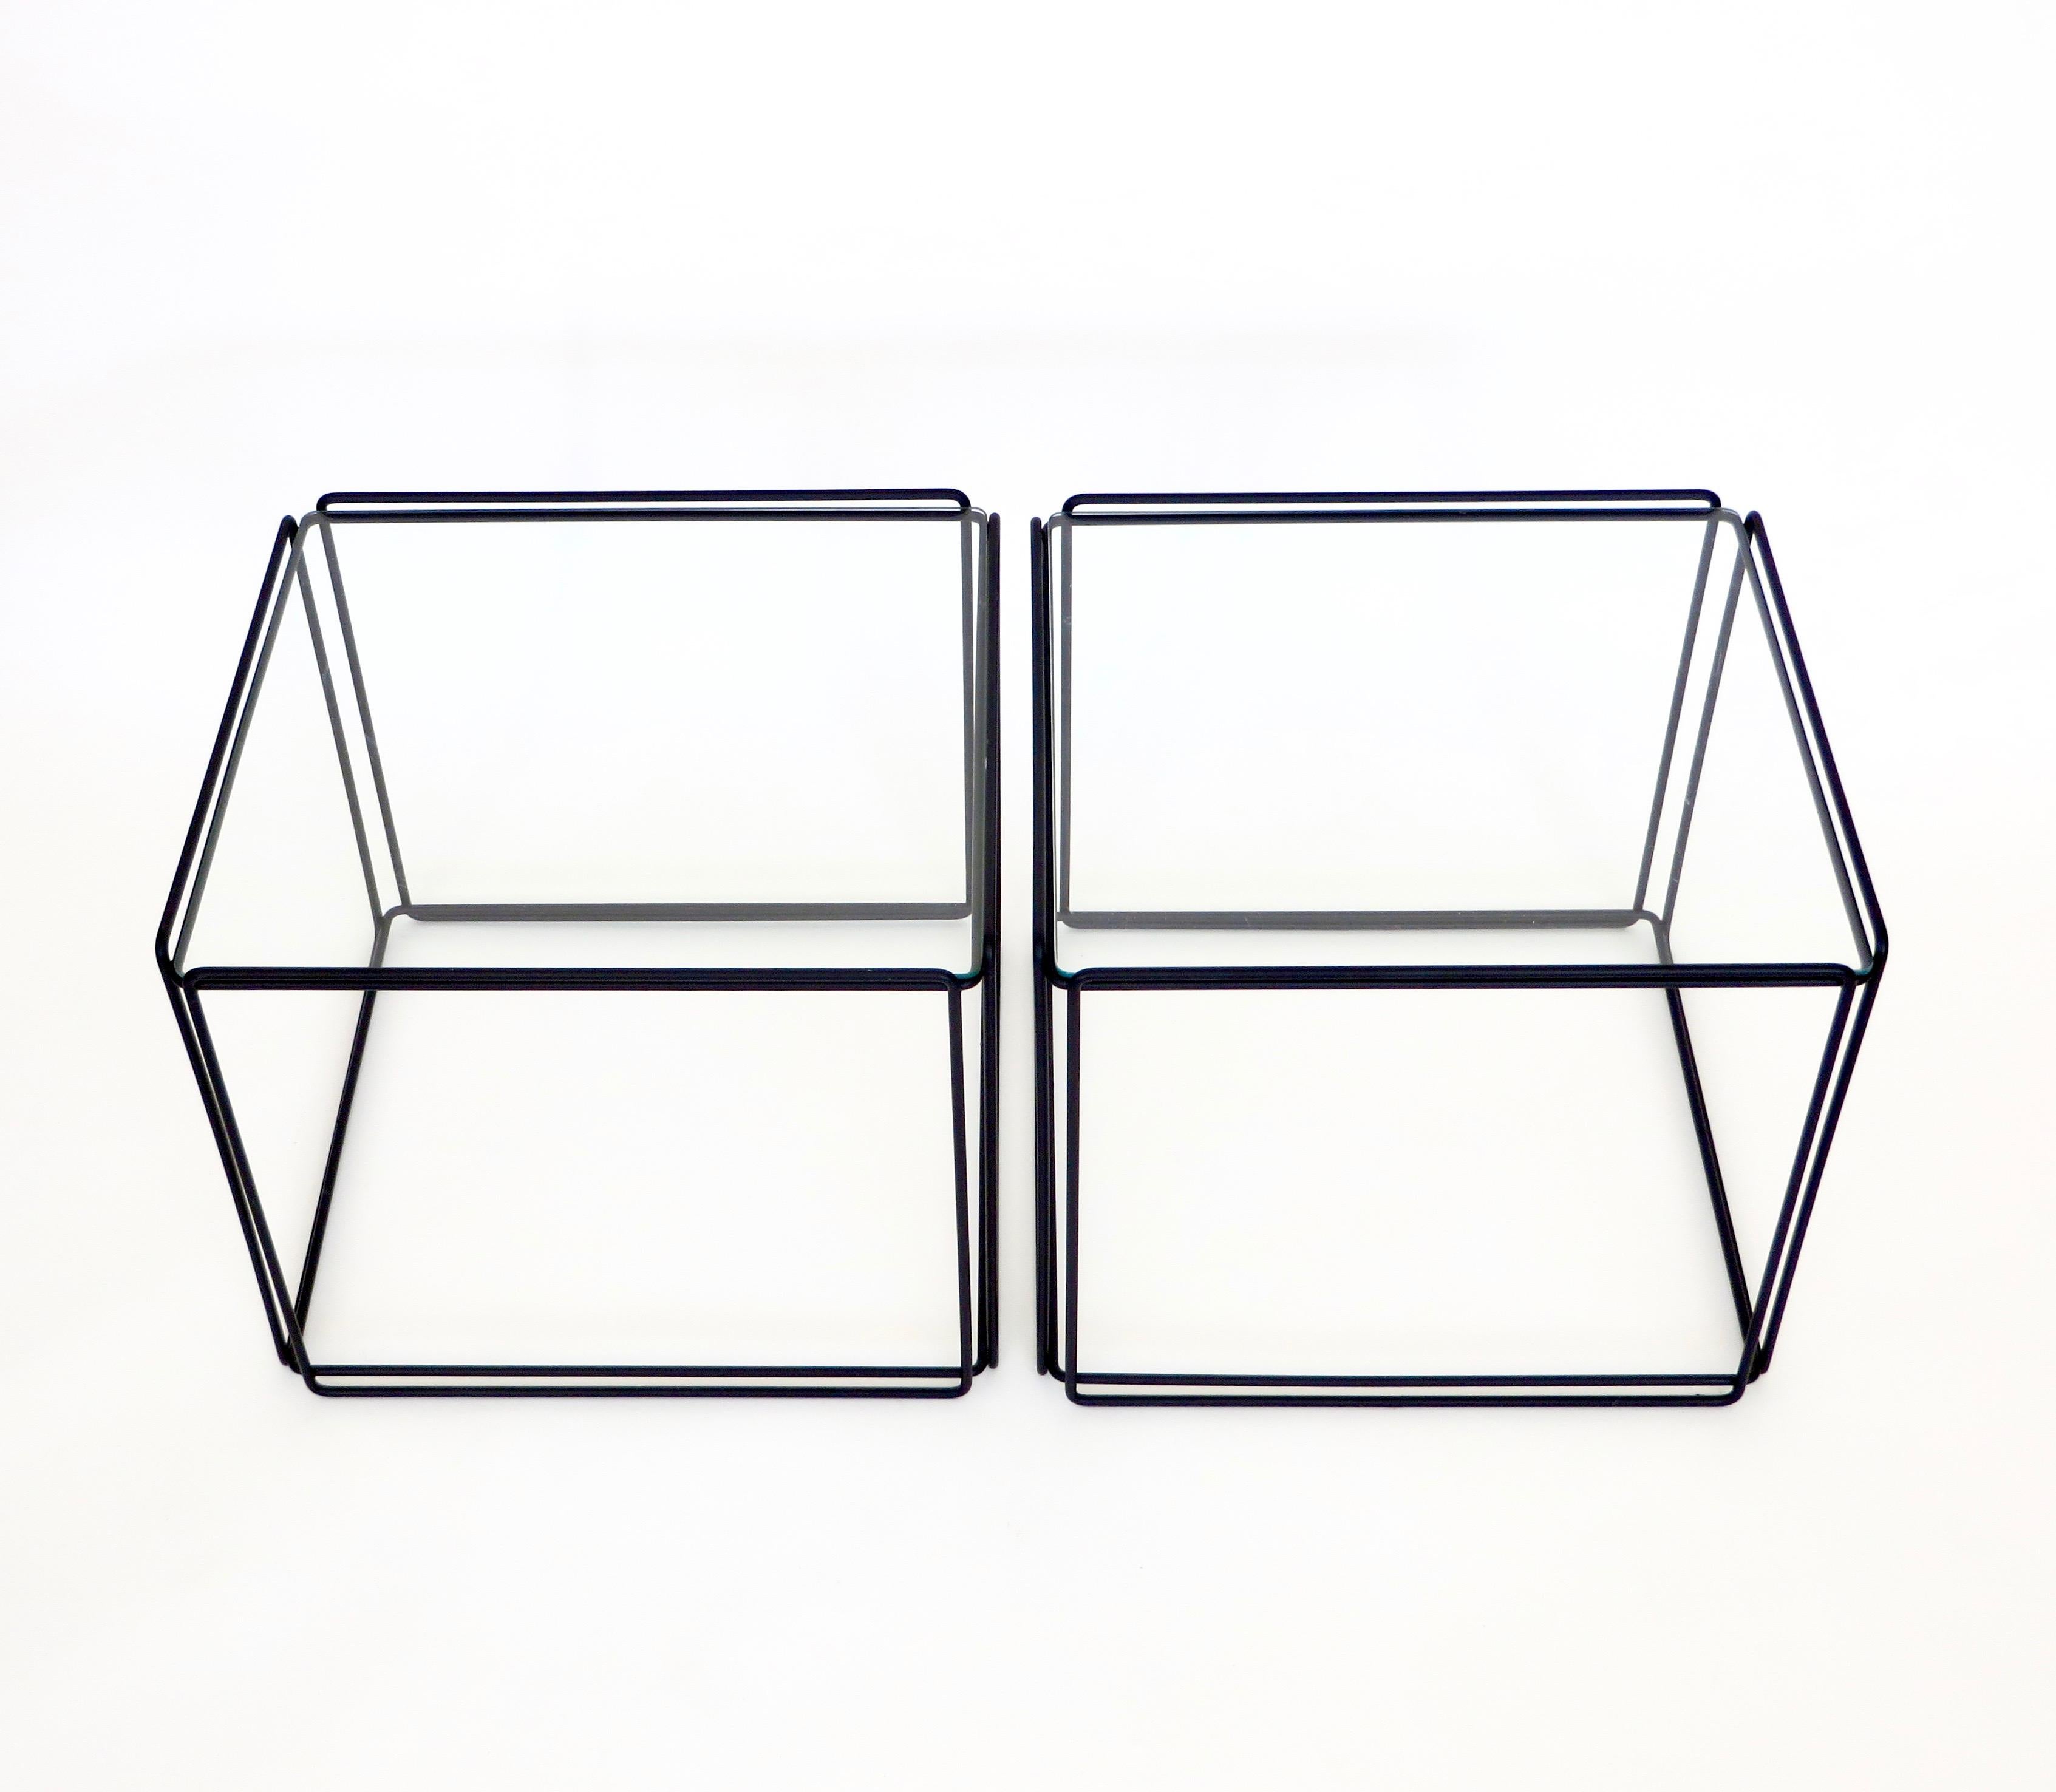 Pair of Isocele side or coffee tables by artist Max Sauze, circa 1970s, France.
Constructed of black enameled steel and glass.
There are two pair available, they can be used as side tables or put together as one large coffee table.
Each pair sold